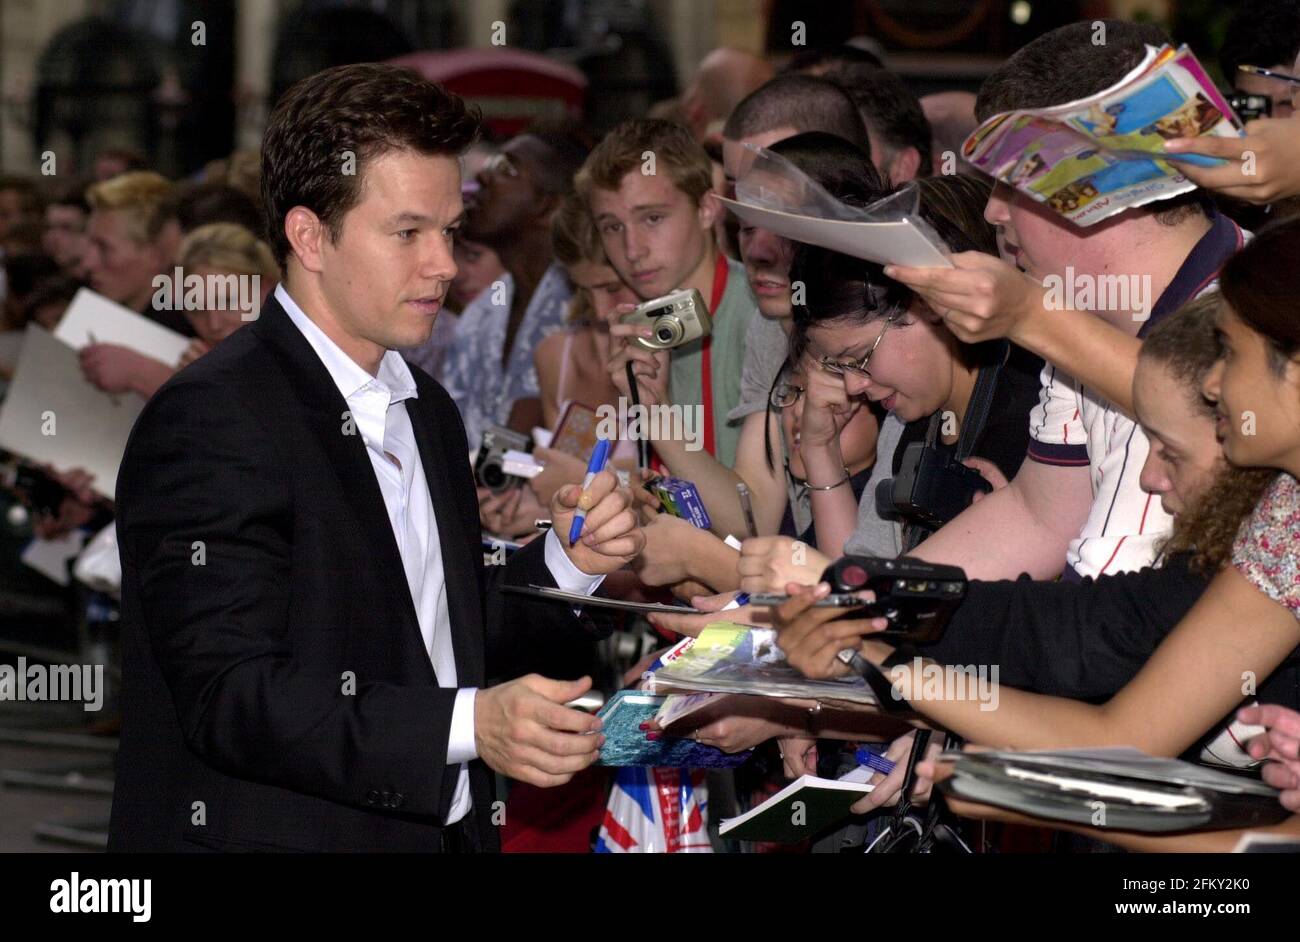 MARK WAHLBERG, STAR OF 'PLANET OF THE APES' ATTENDING THE FILMS PREMIER THIS EVENING. Stock Photo